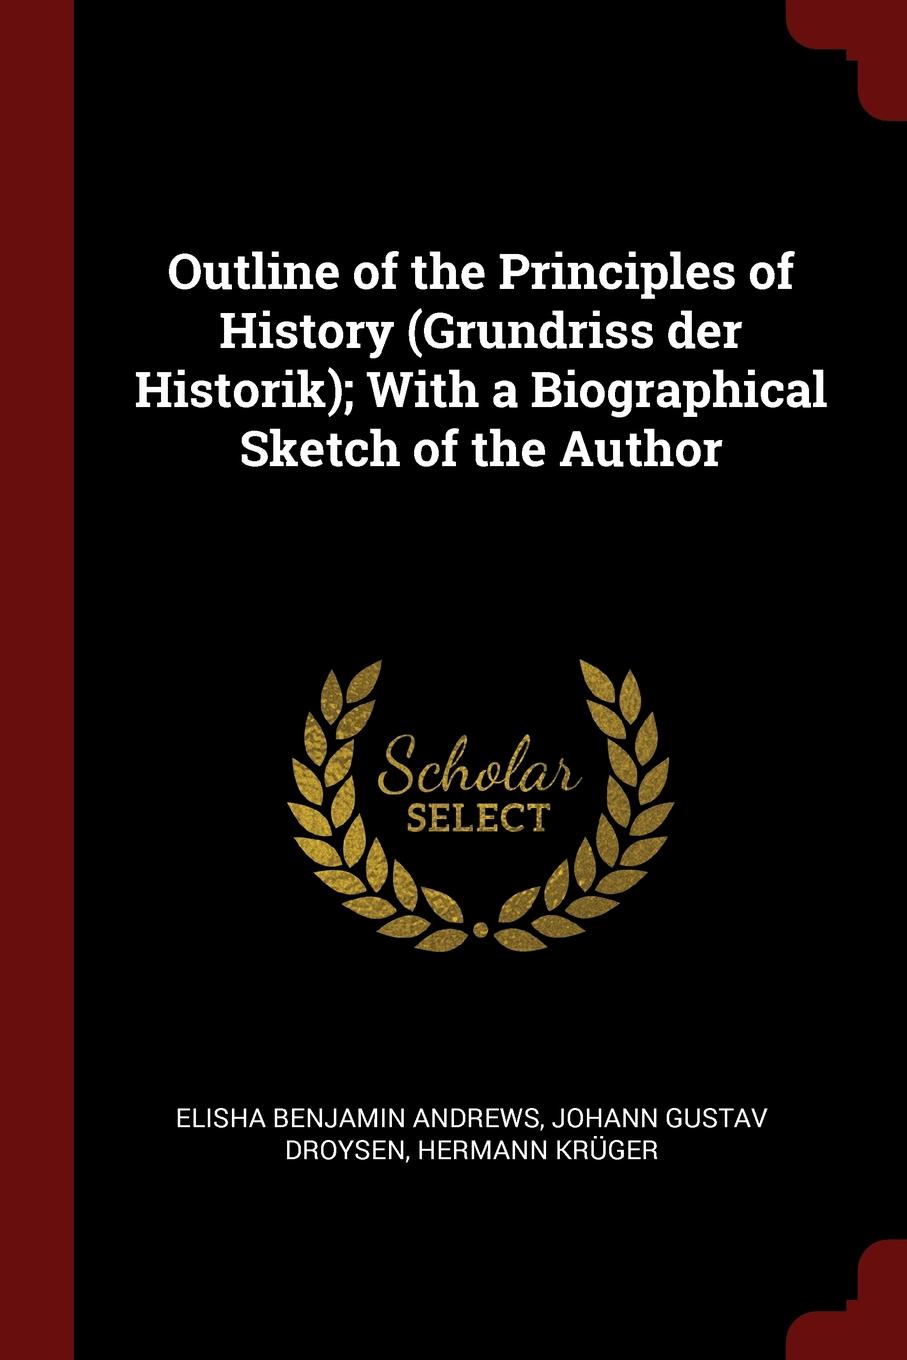 Outline of the Principles of History (Grundriss der Historik); With a Biographical Sketch of the Author